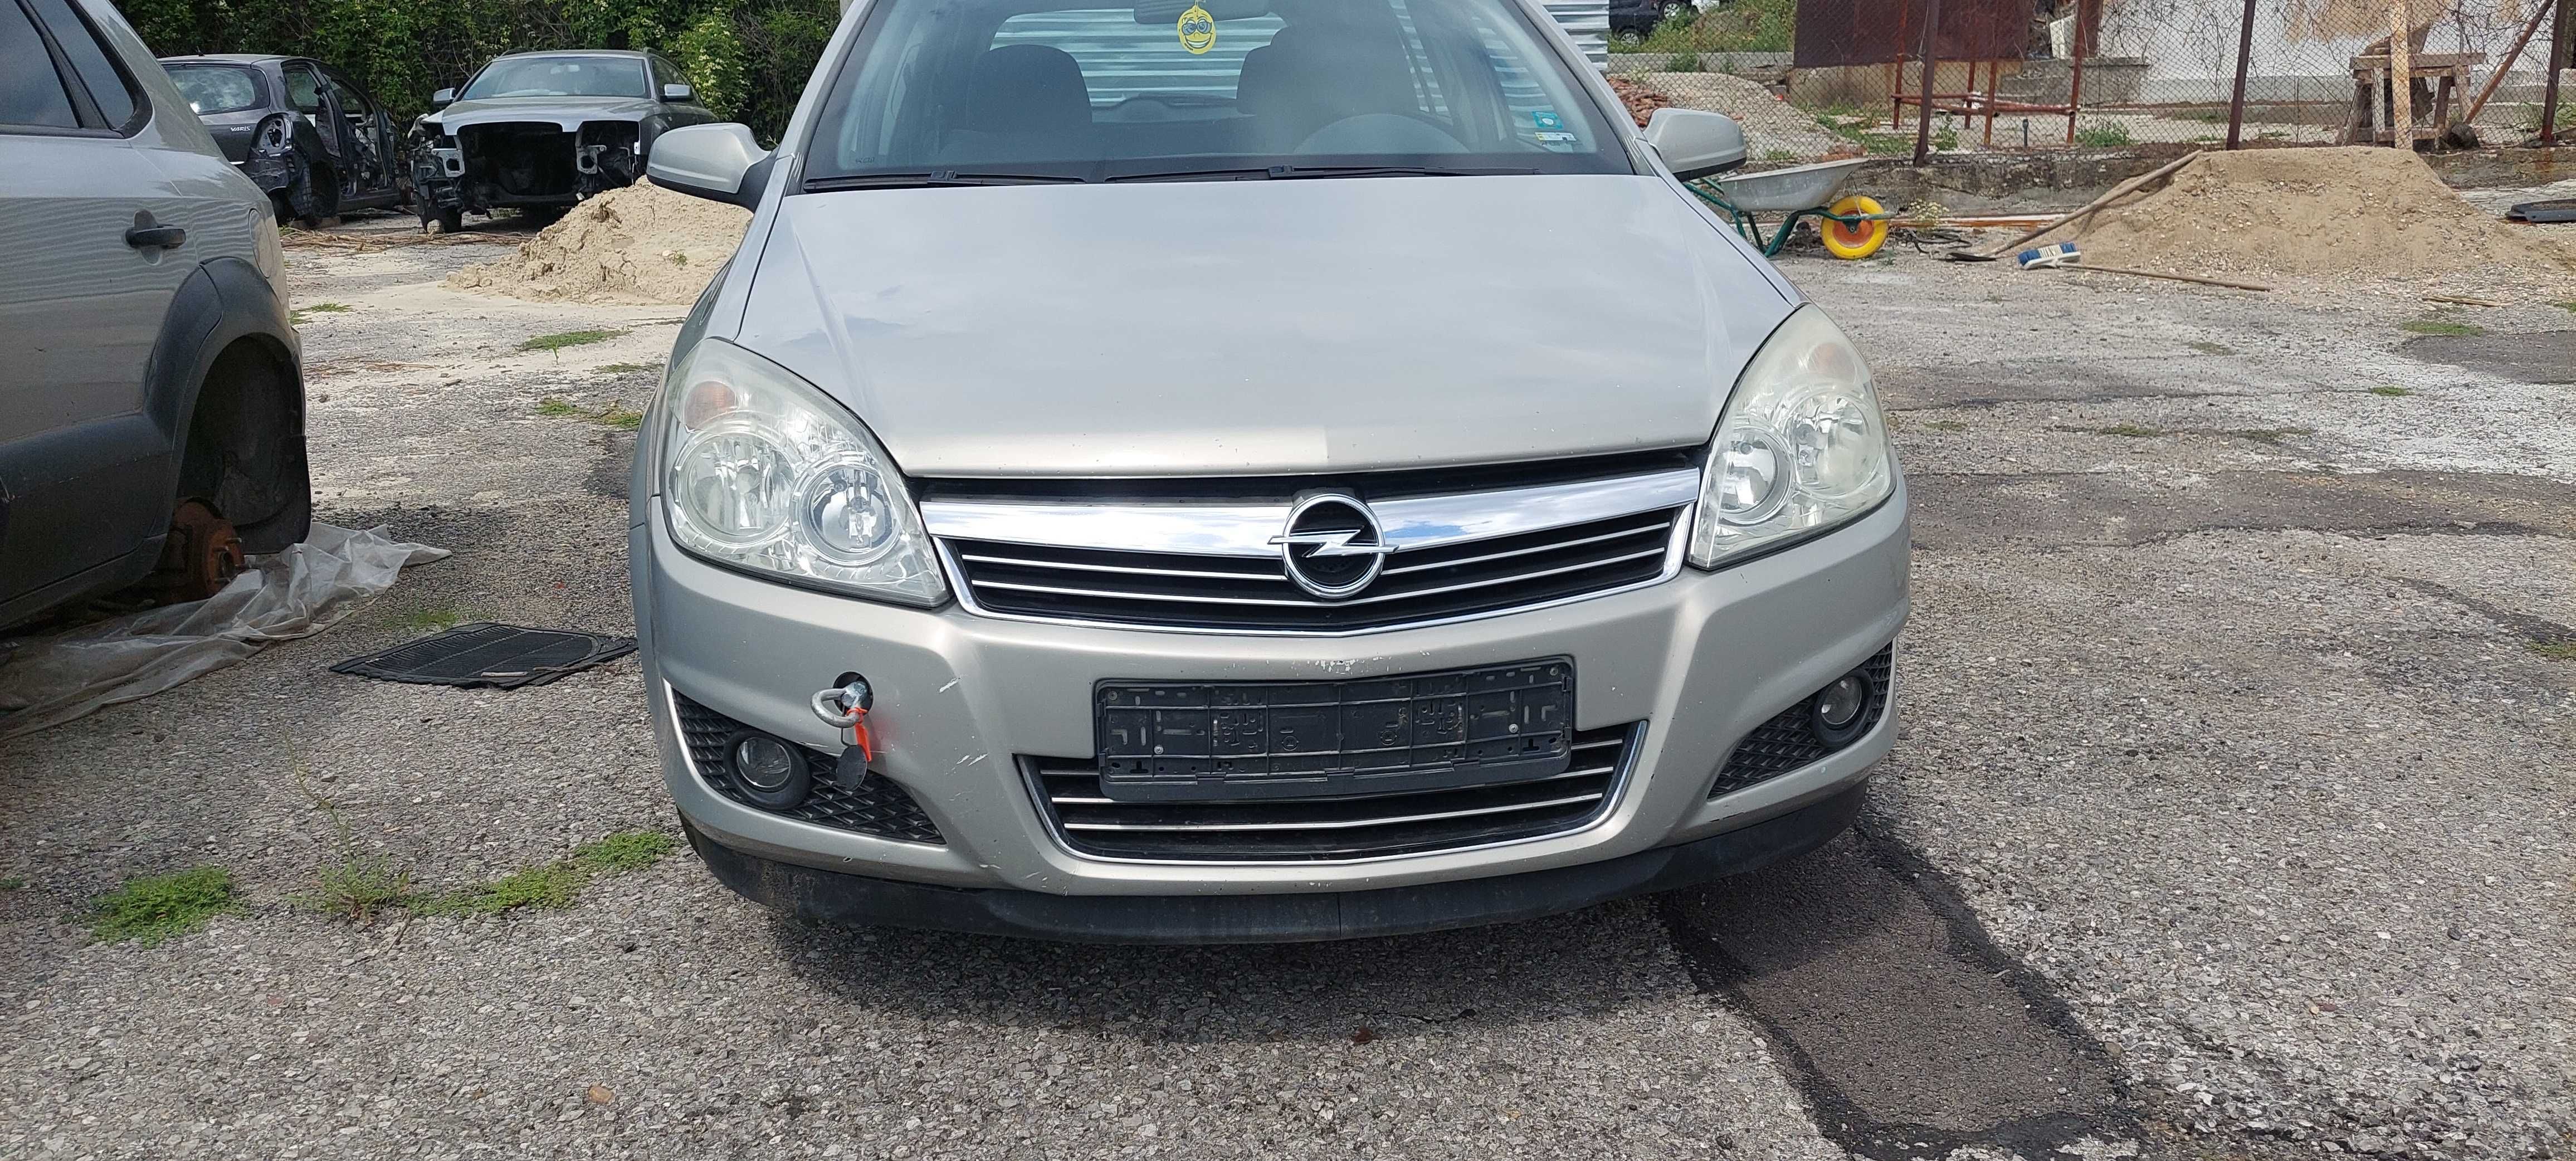 Opel Astra 1.7 cdti  Опел Астра
 2006, Комби, За части